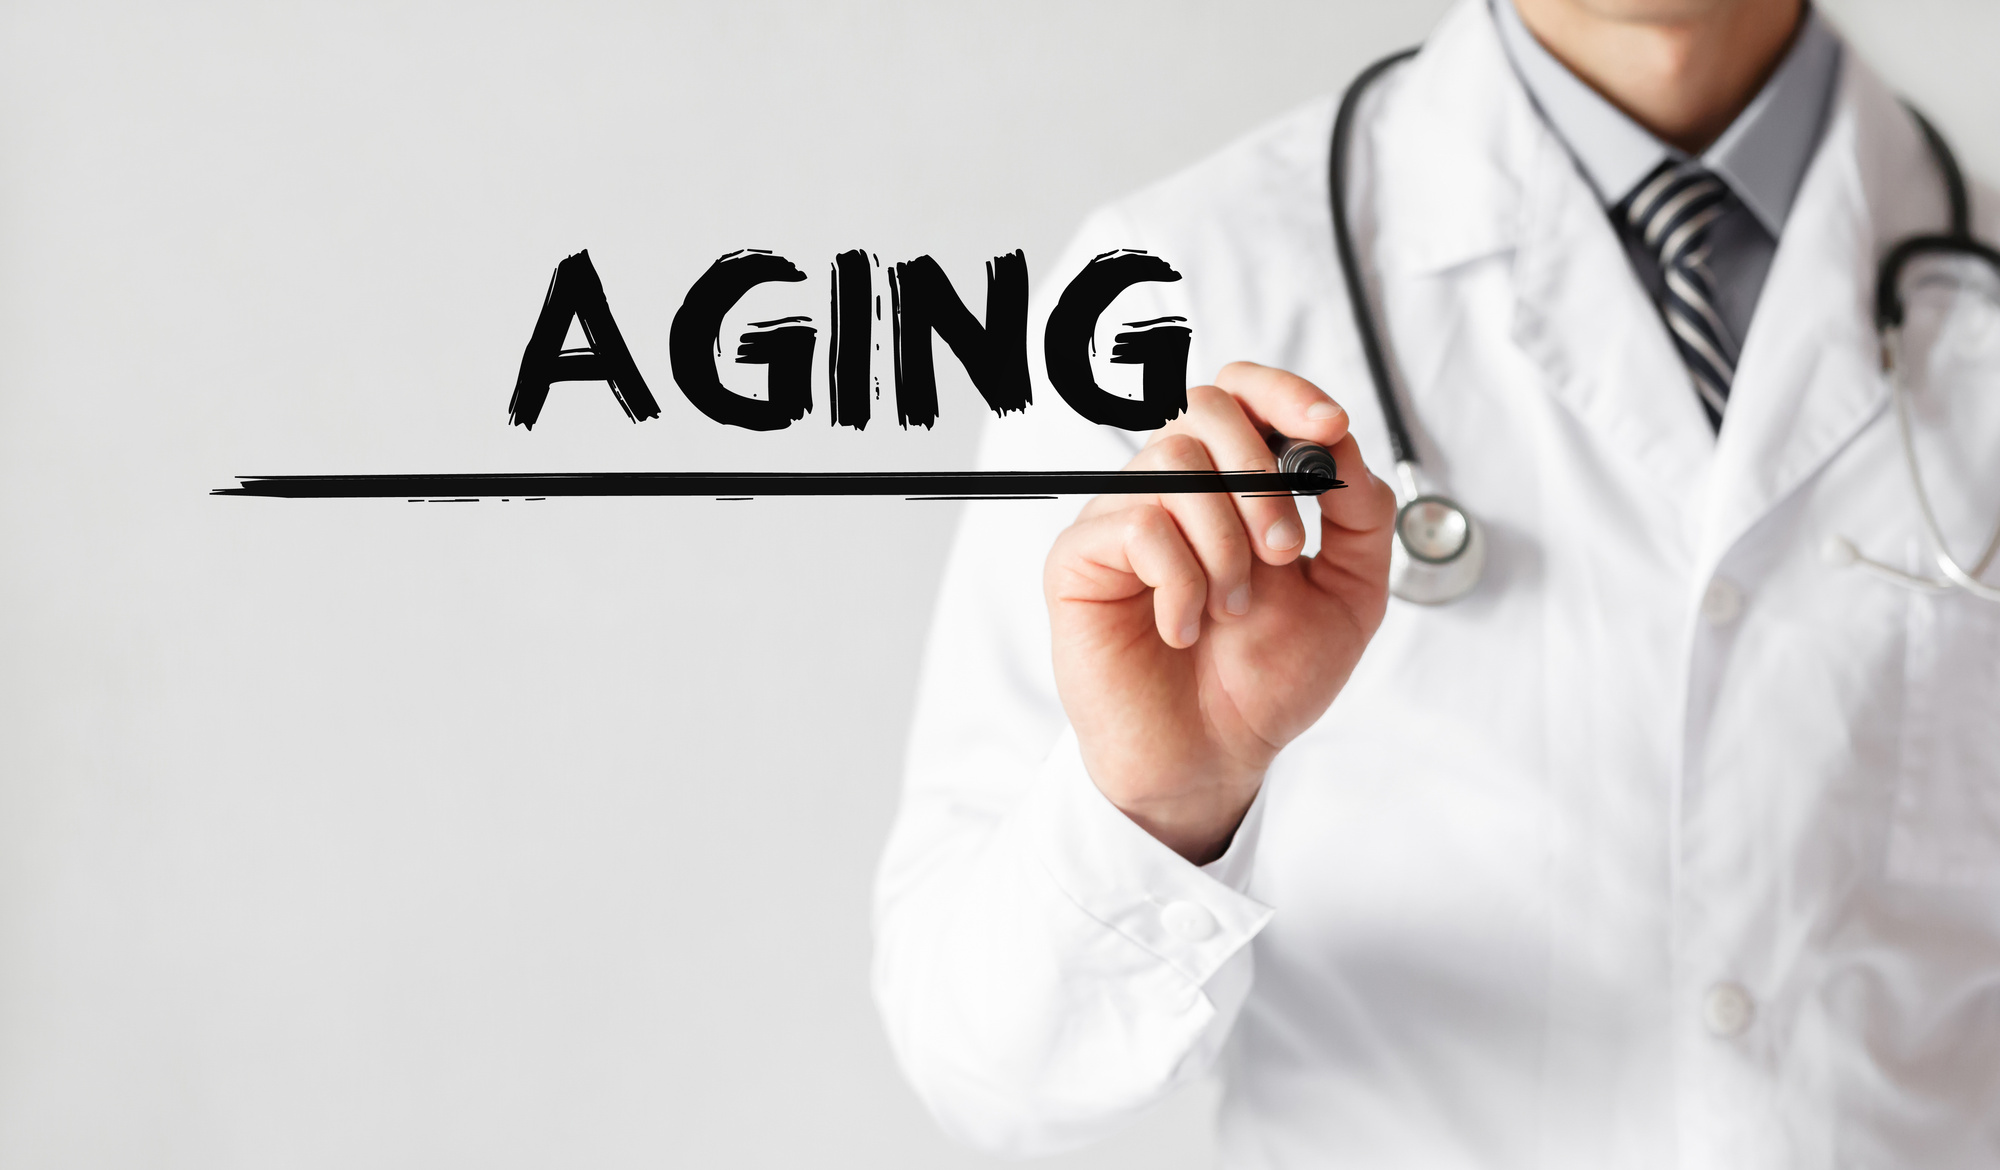 Aging is Natural: So Is Asking For Help